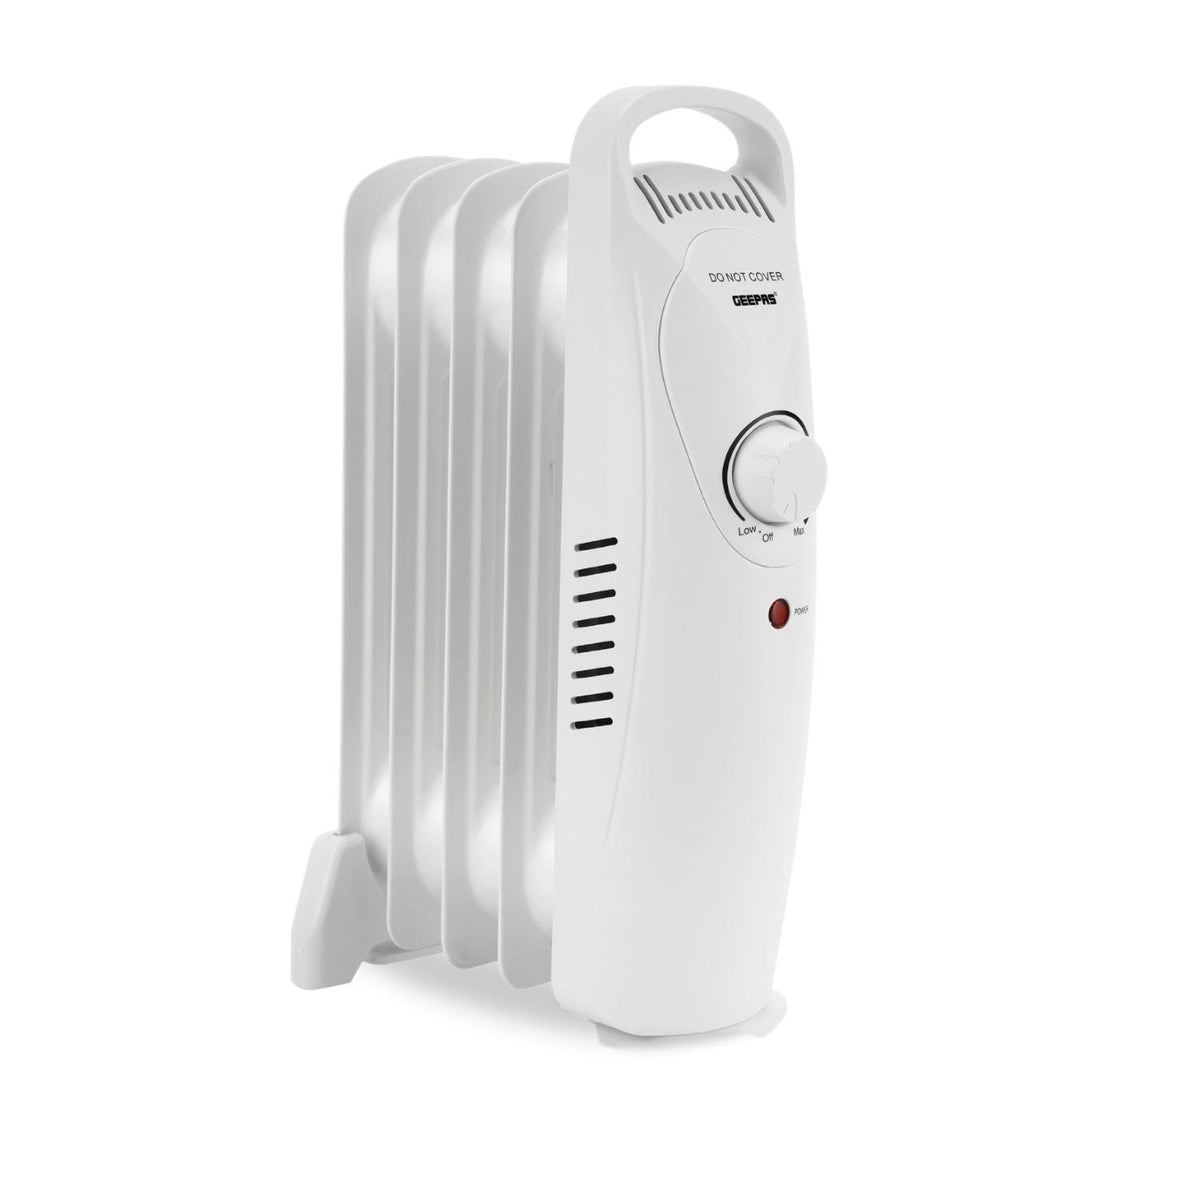 5-Fin White Oil-Filled Radiator 450W Electric Heater